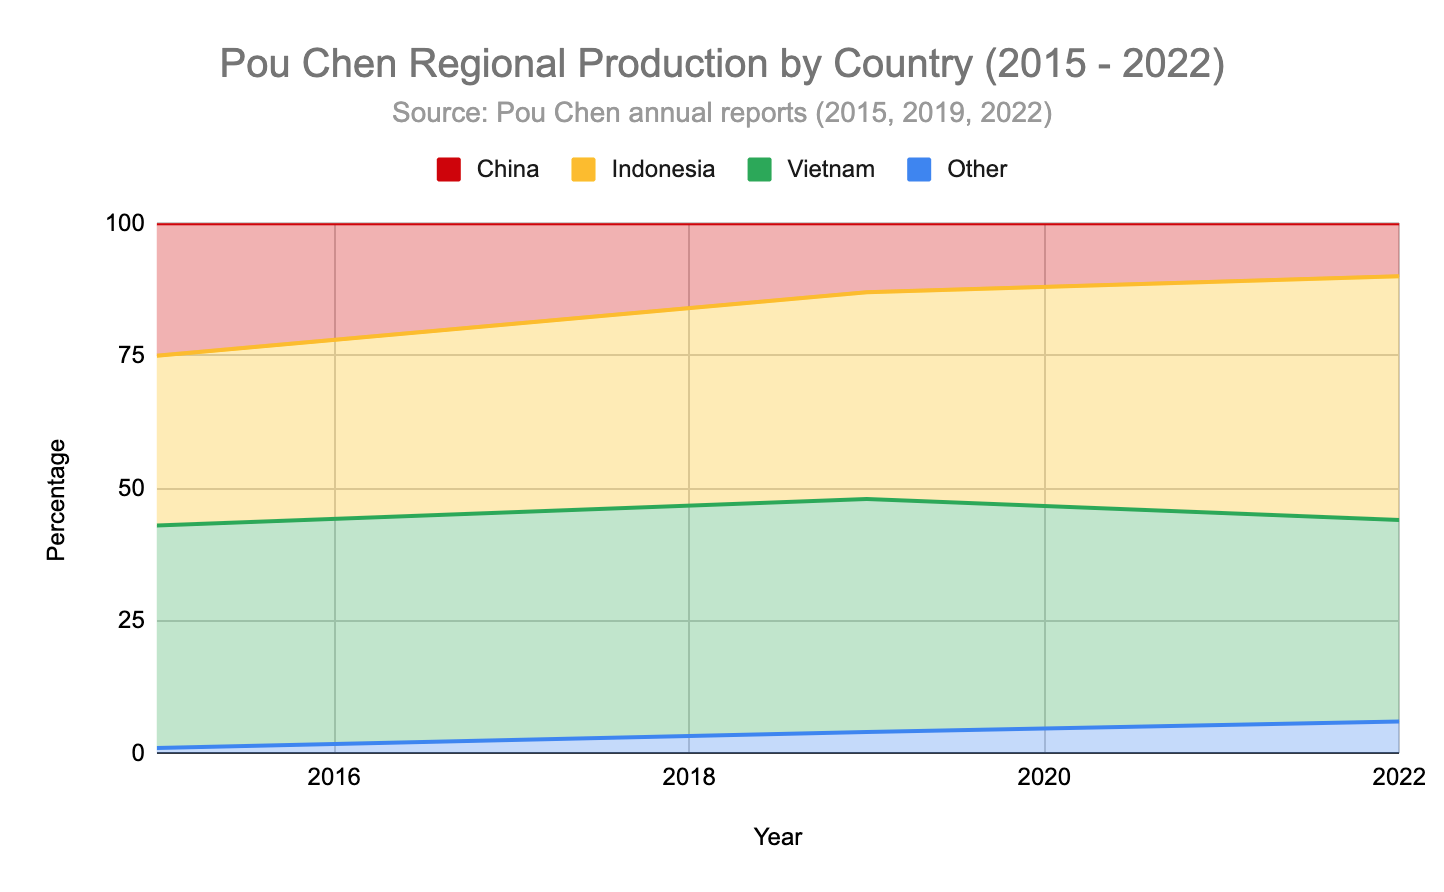 A CLB graph shows that Pou Chen's China production has been reducing since 2015 according to annual reports